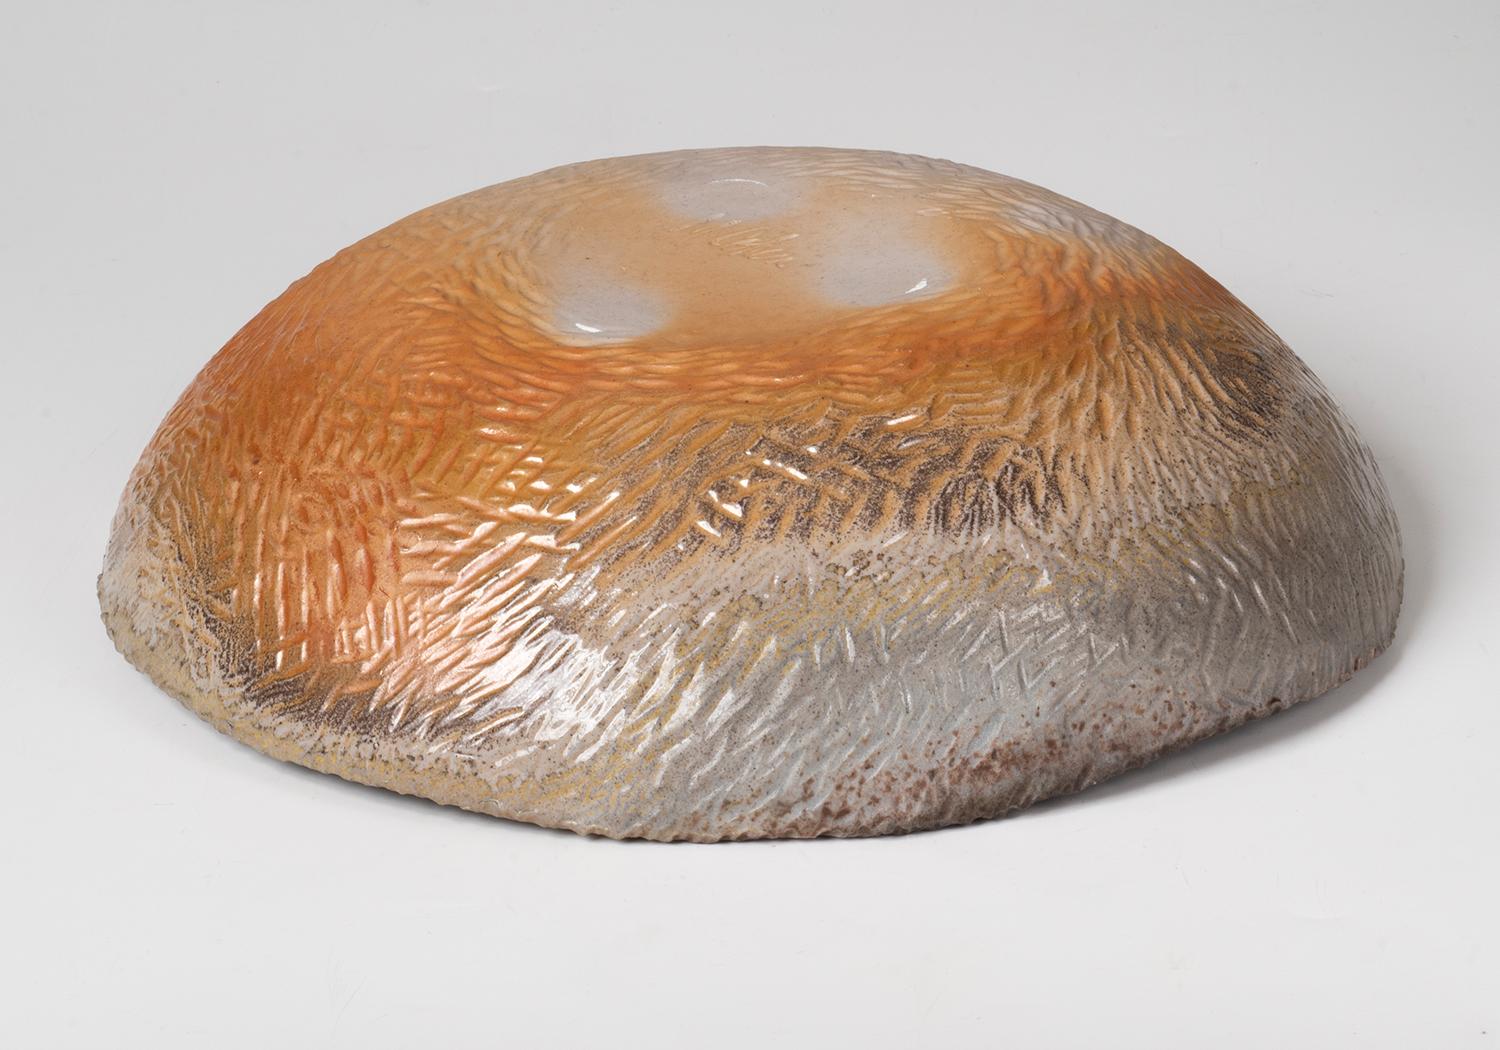 Slab built bowl. Beautiful mottled golden and brown tones produced in a 3 day wood fire.

Marc Cohen has over 30 years of experience as a professional photographer, printmaker and artist. He lives and works in New Jersey.